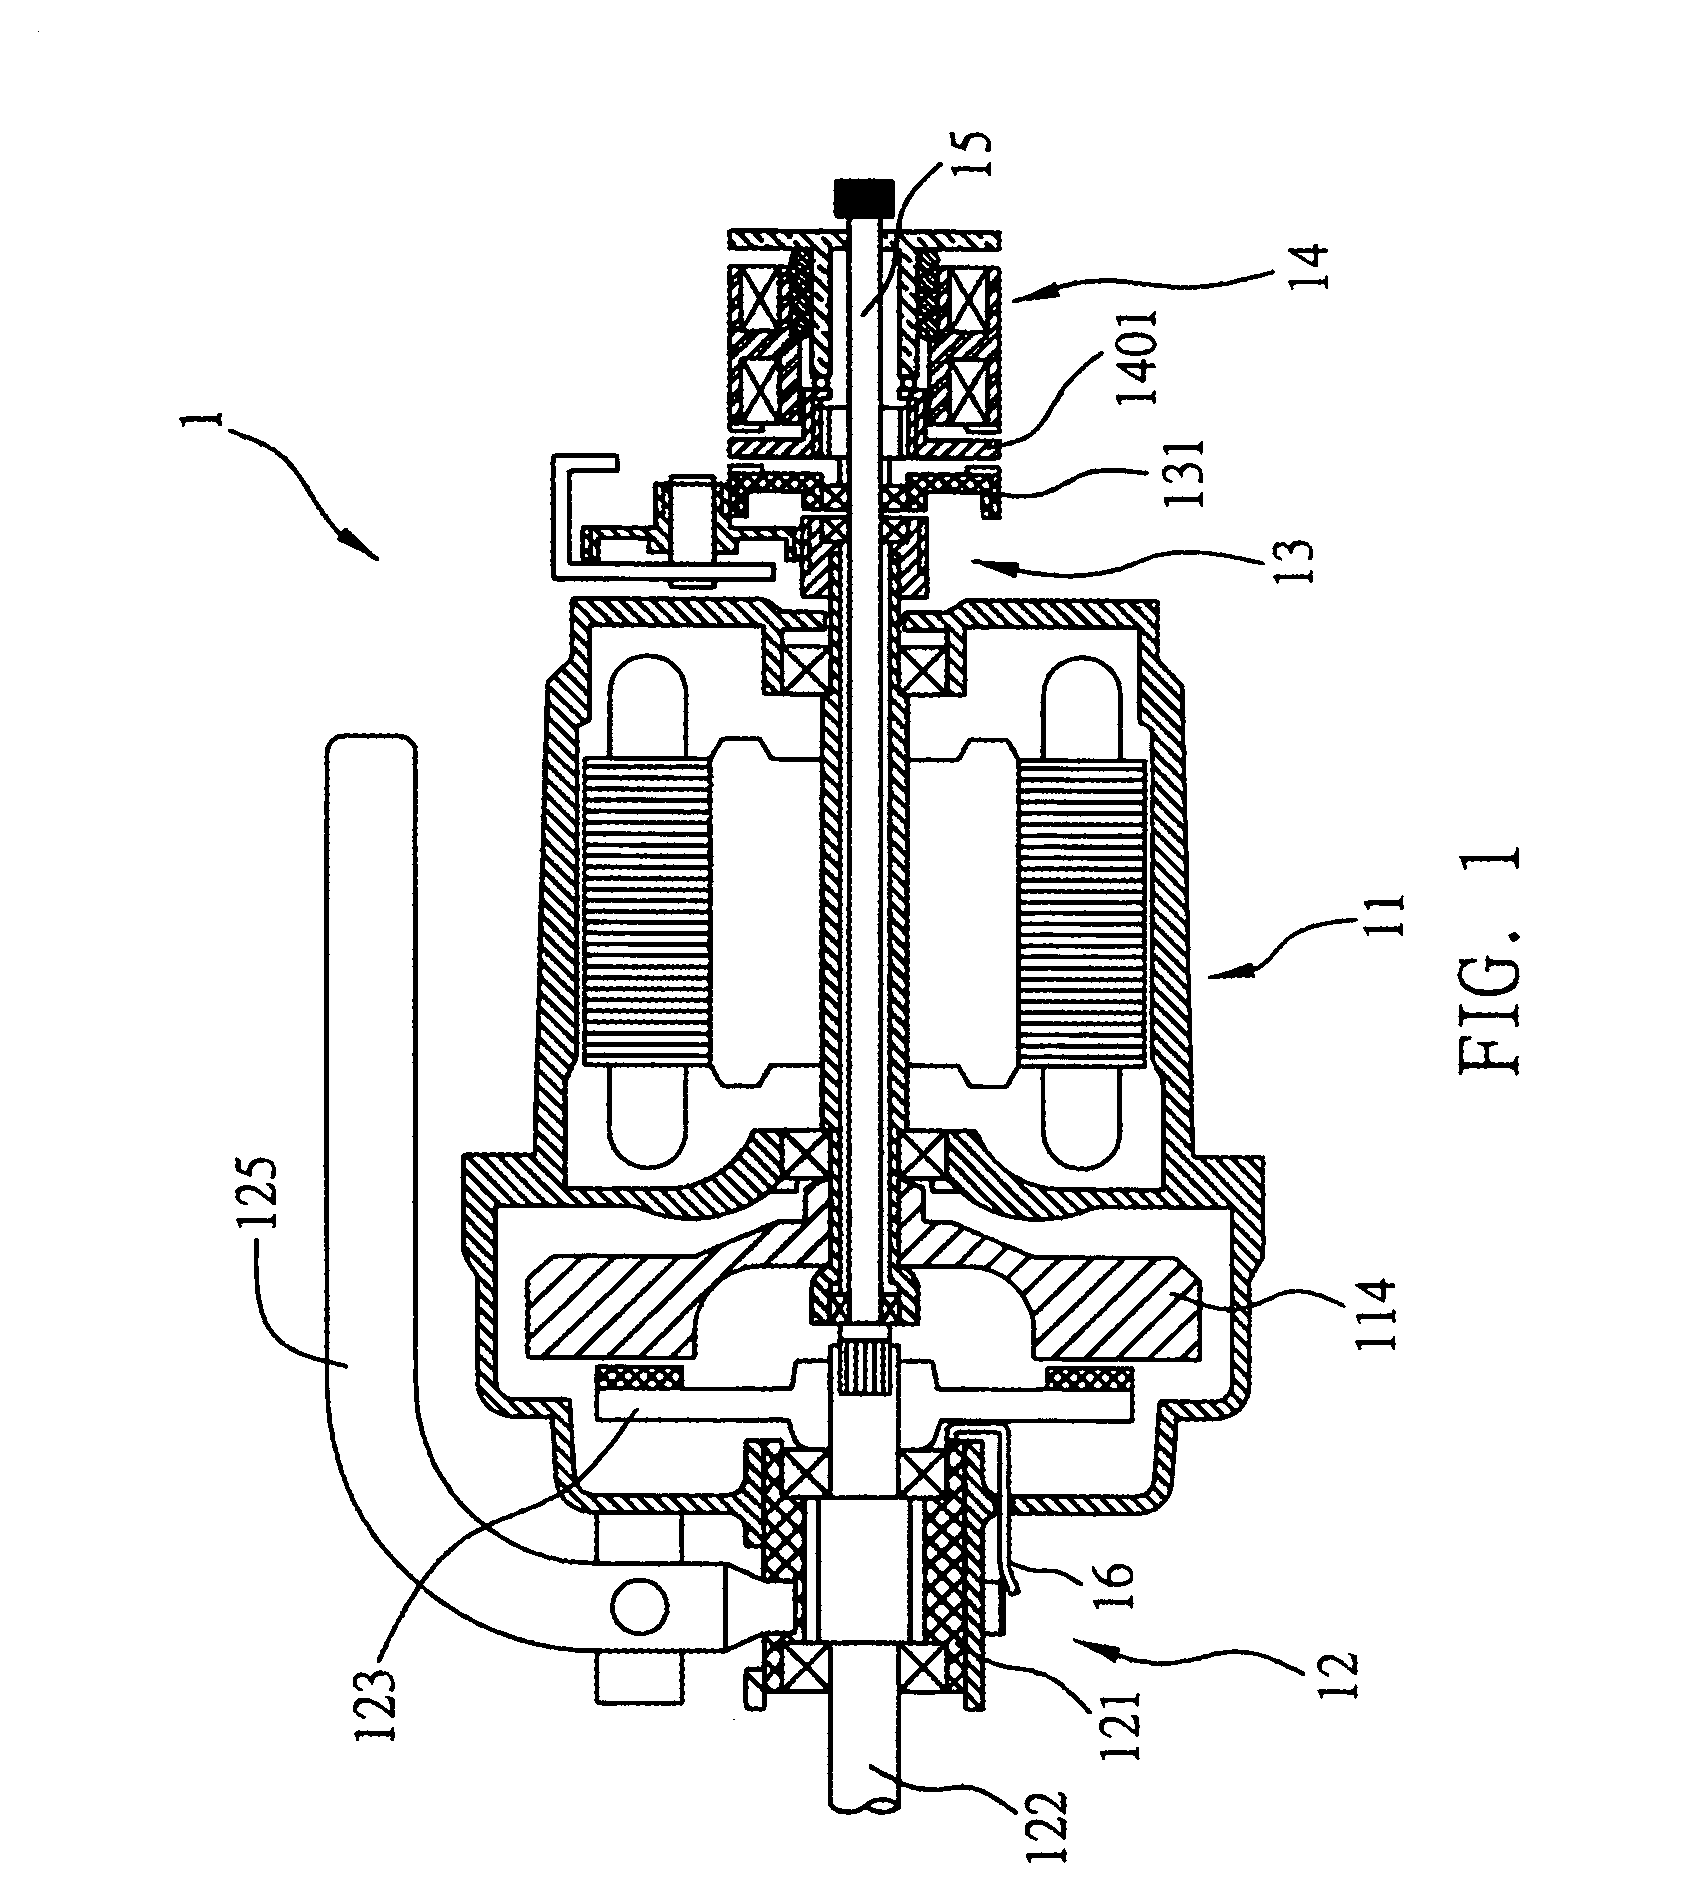 Motor system for sewing machine